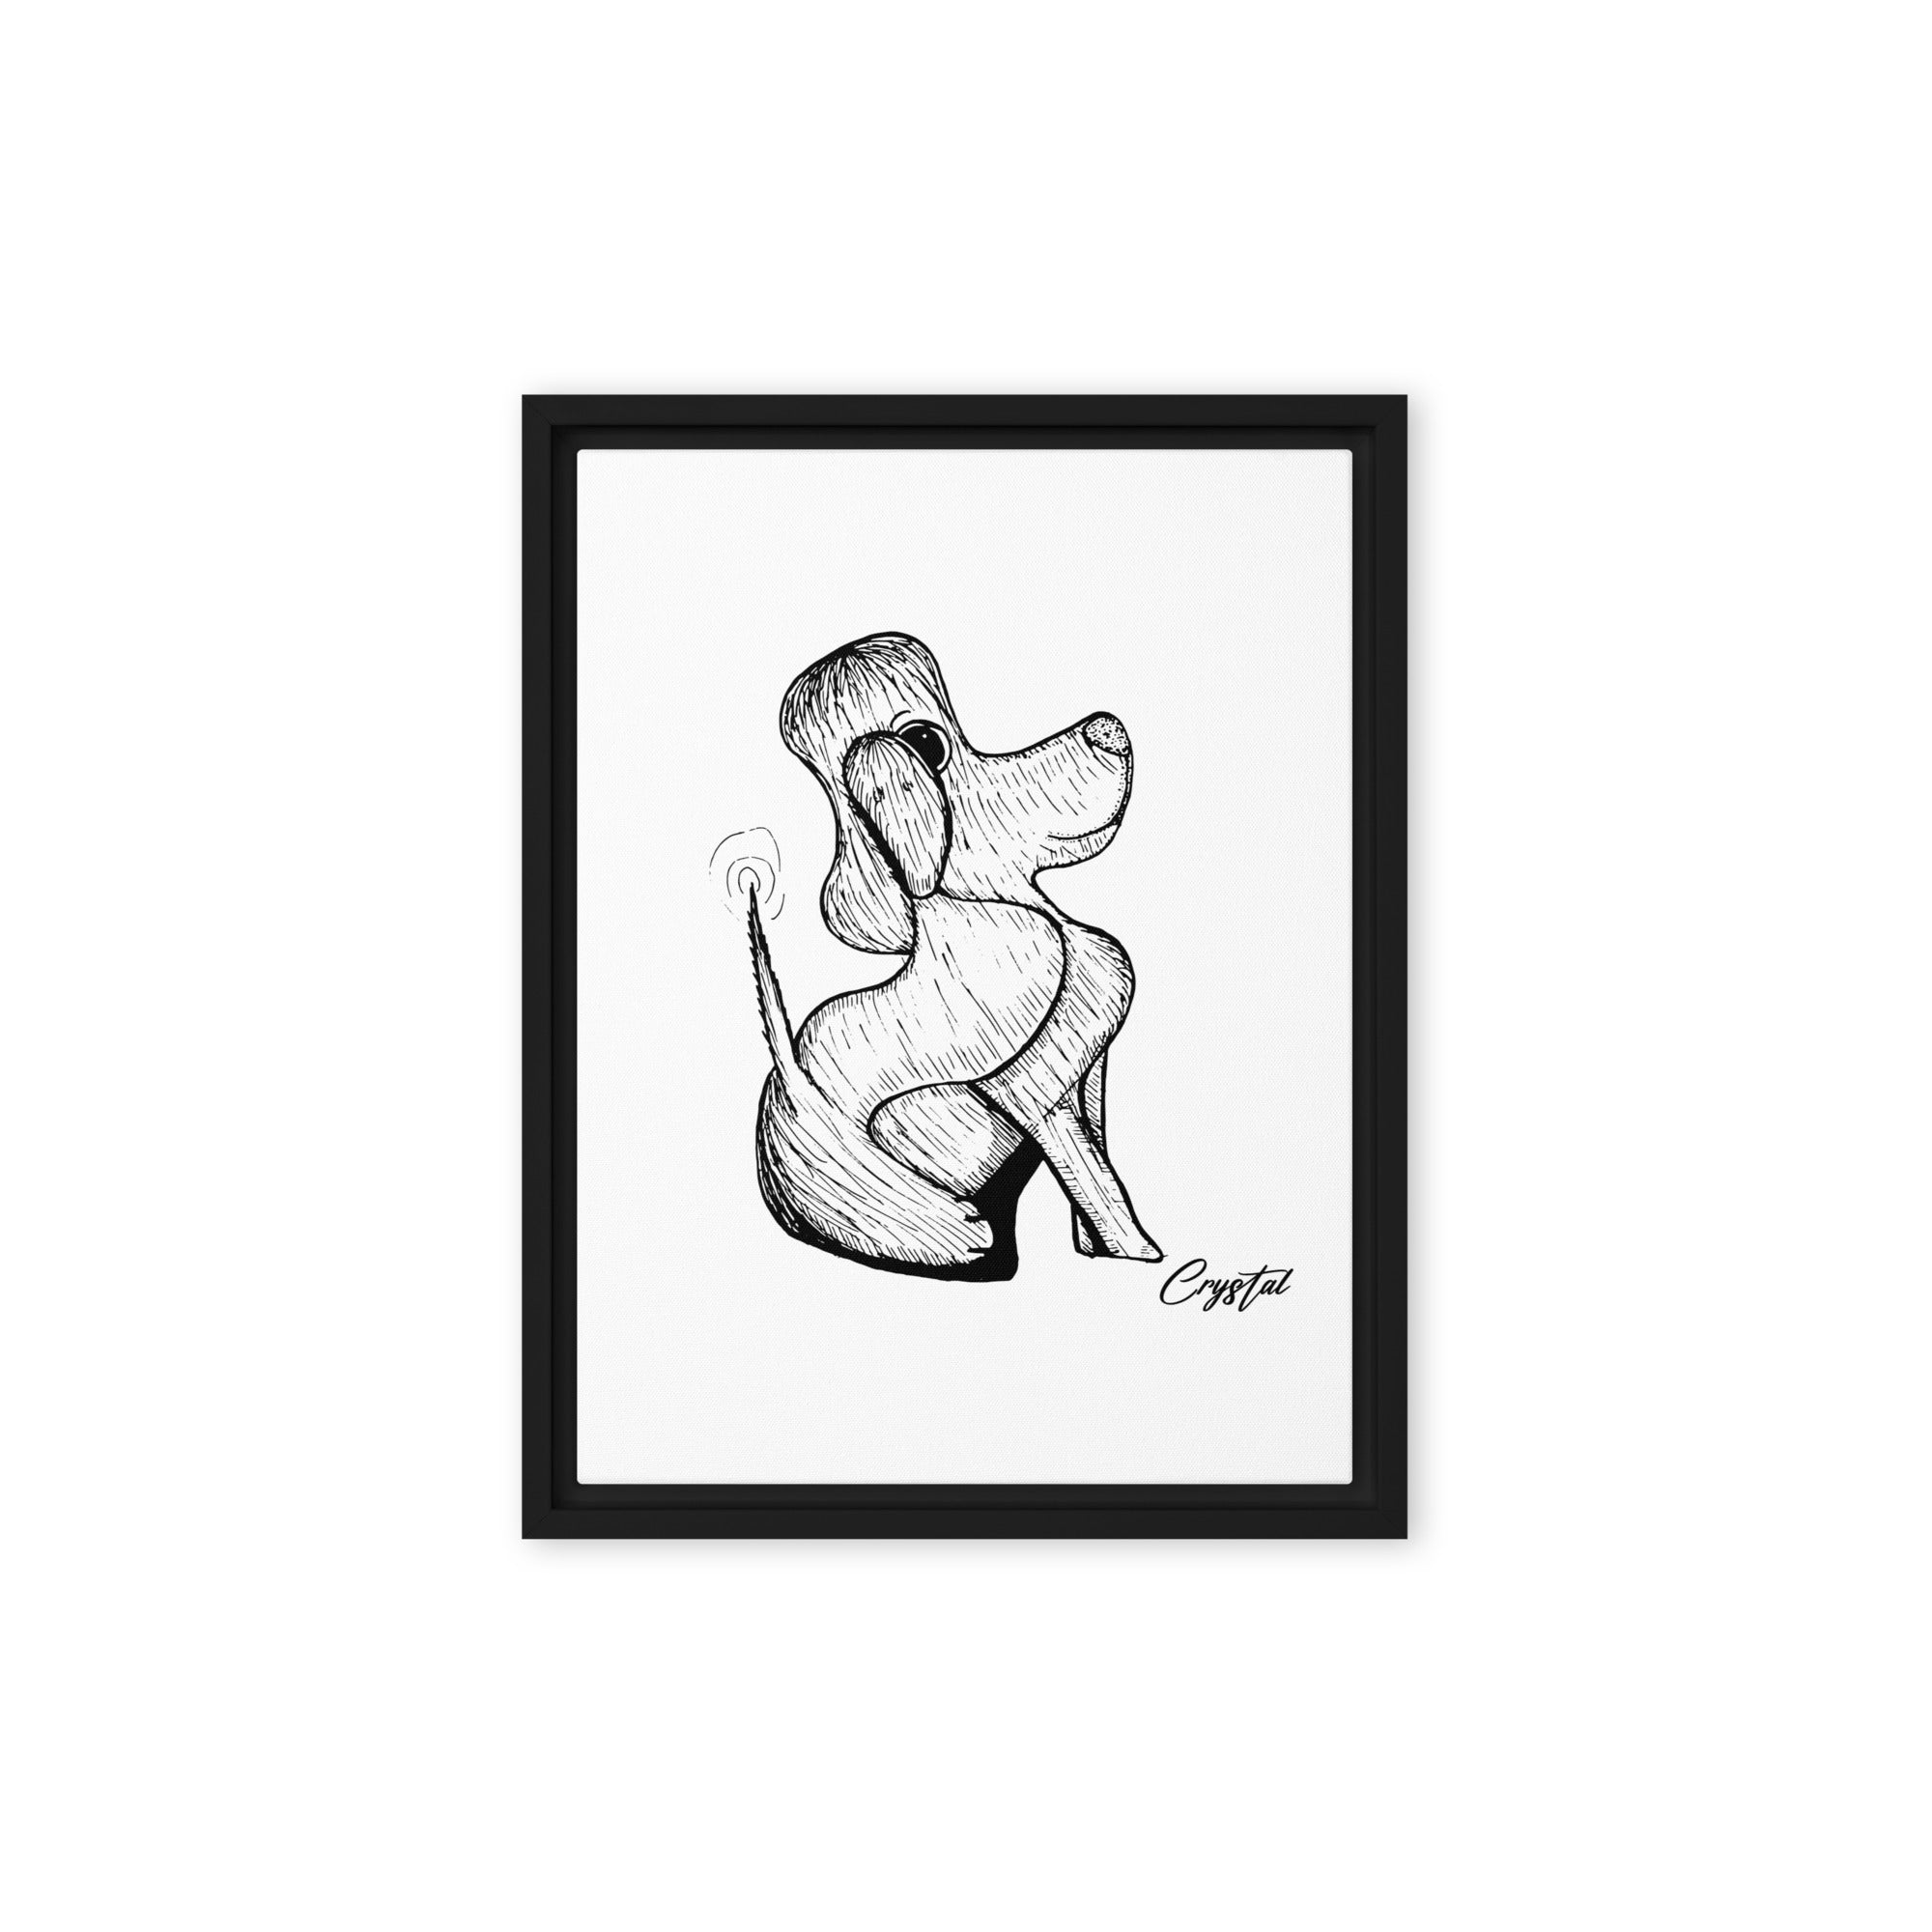 Abstract Drawing of Happy Dog Sitting & Wagging Tail - Cute & Creepy "Stay Weird" Cartoon Illustration Framed canvas